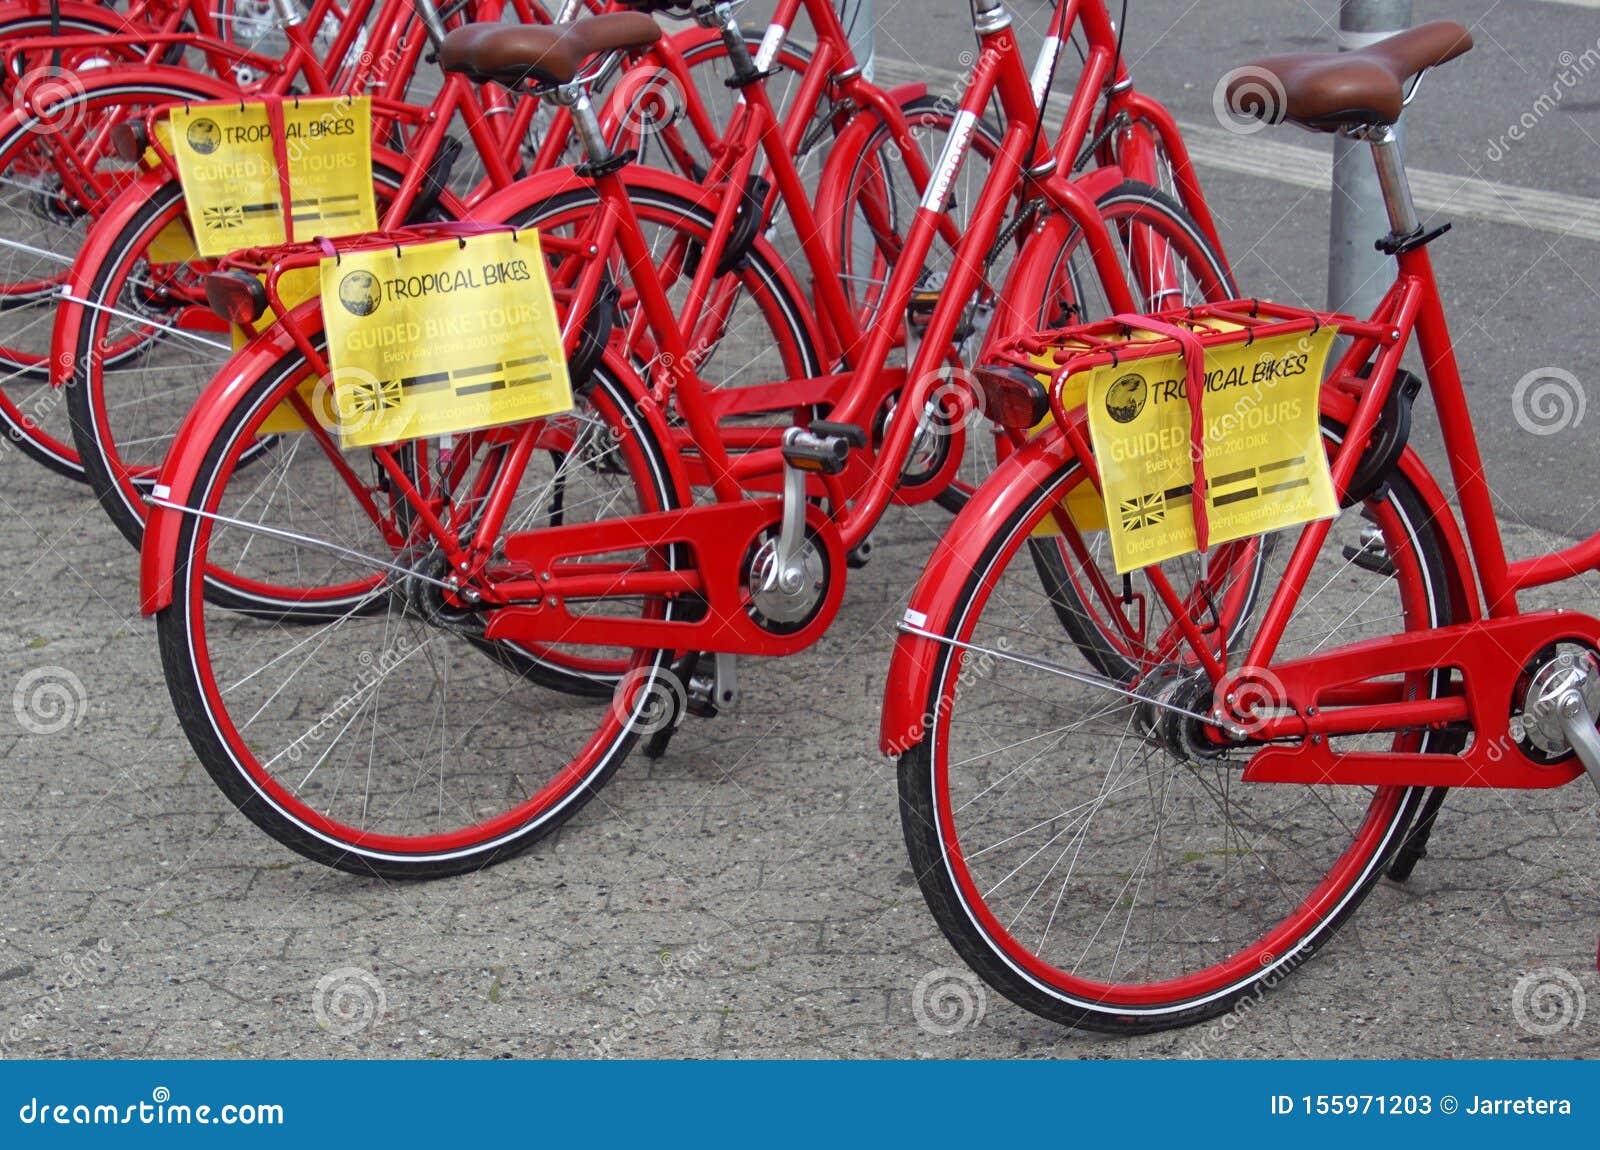 Row of Red Guided Rental Bikes: Tropical Bikes Editorial Stock Photo - of tour: 155971203